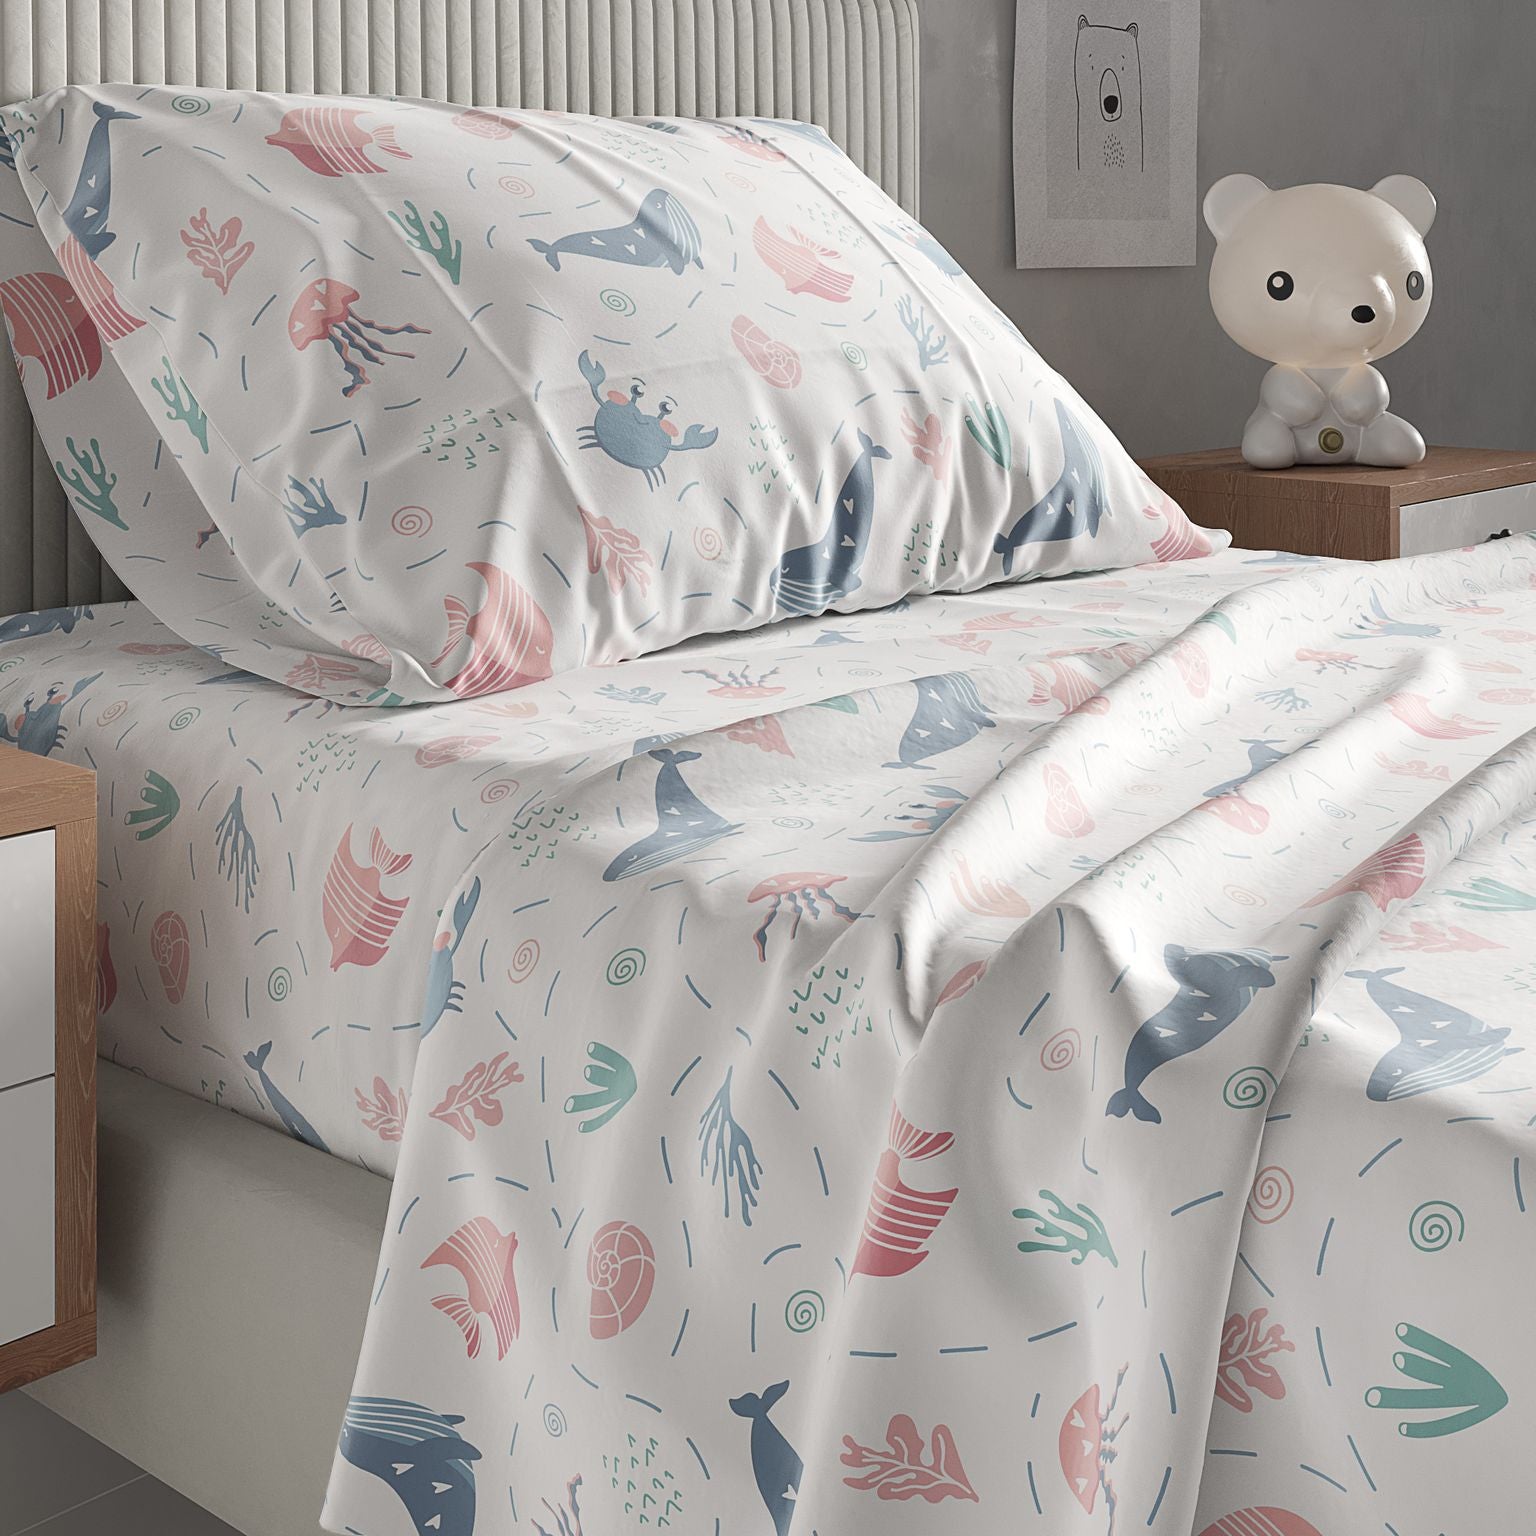 New Kids Sheet Set - Fish and Whales